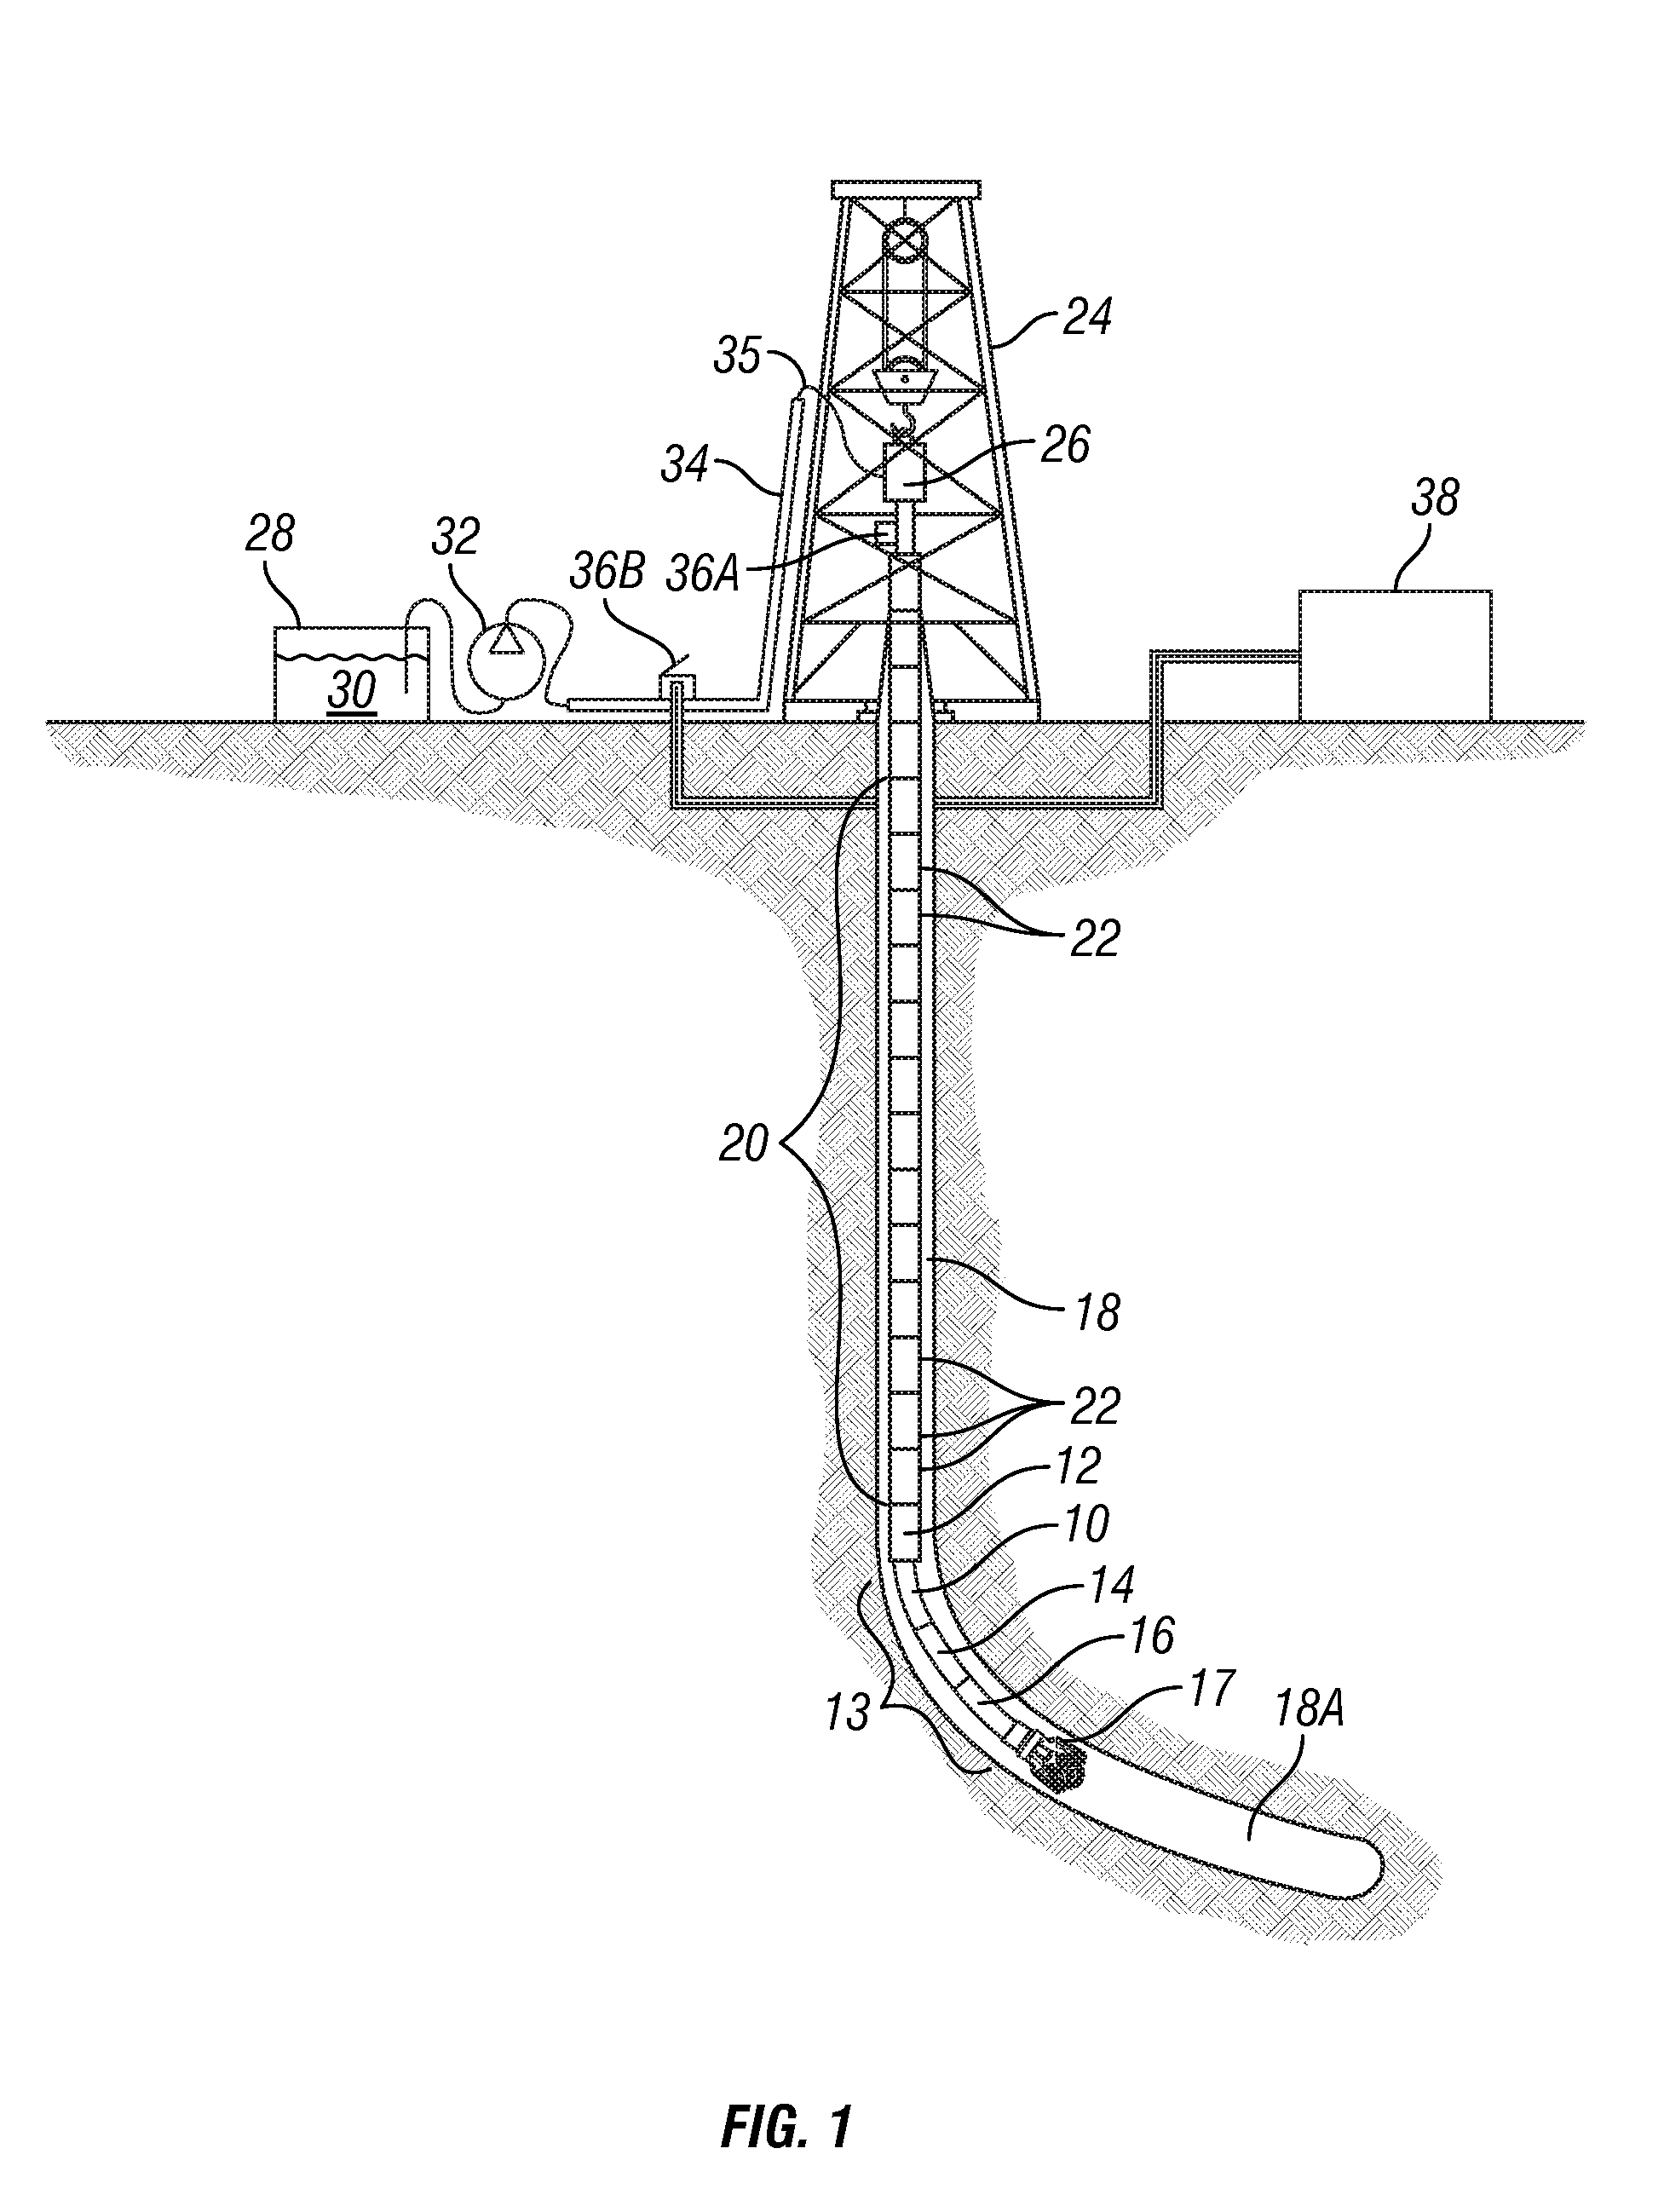 Method for estimating formation permeability using time lapse measurements